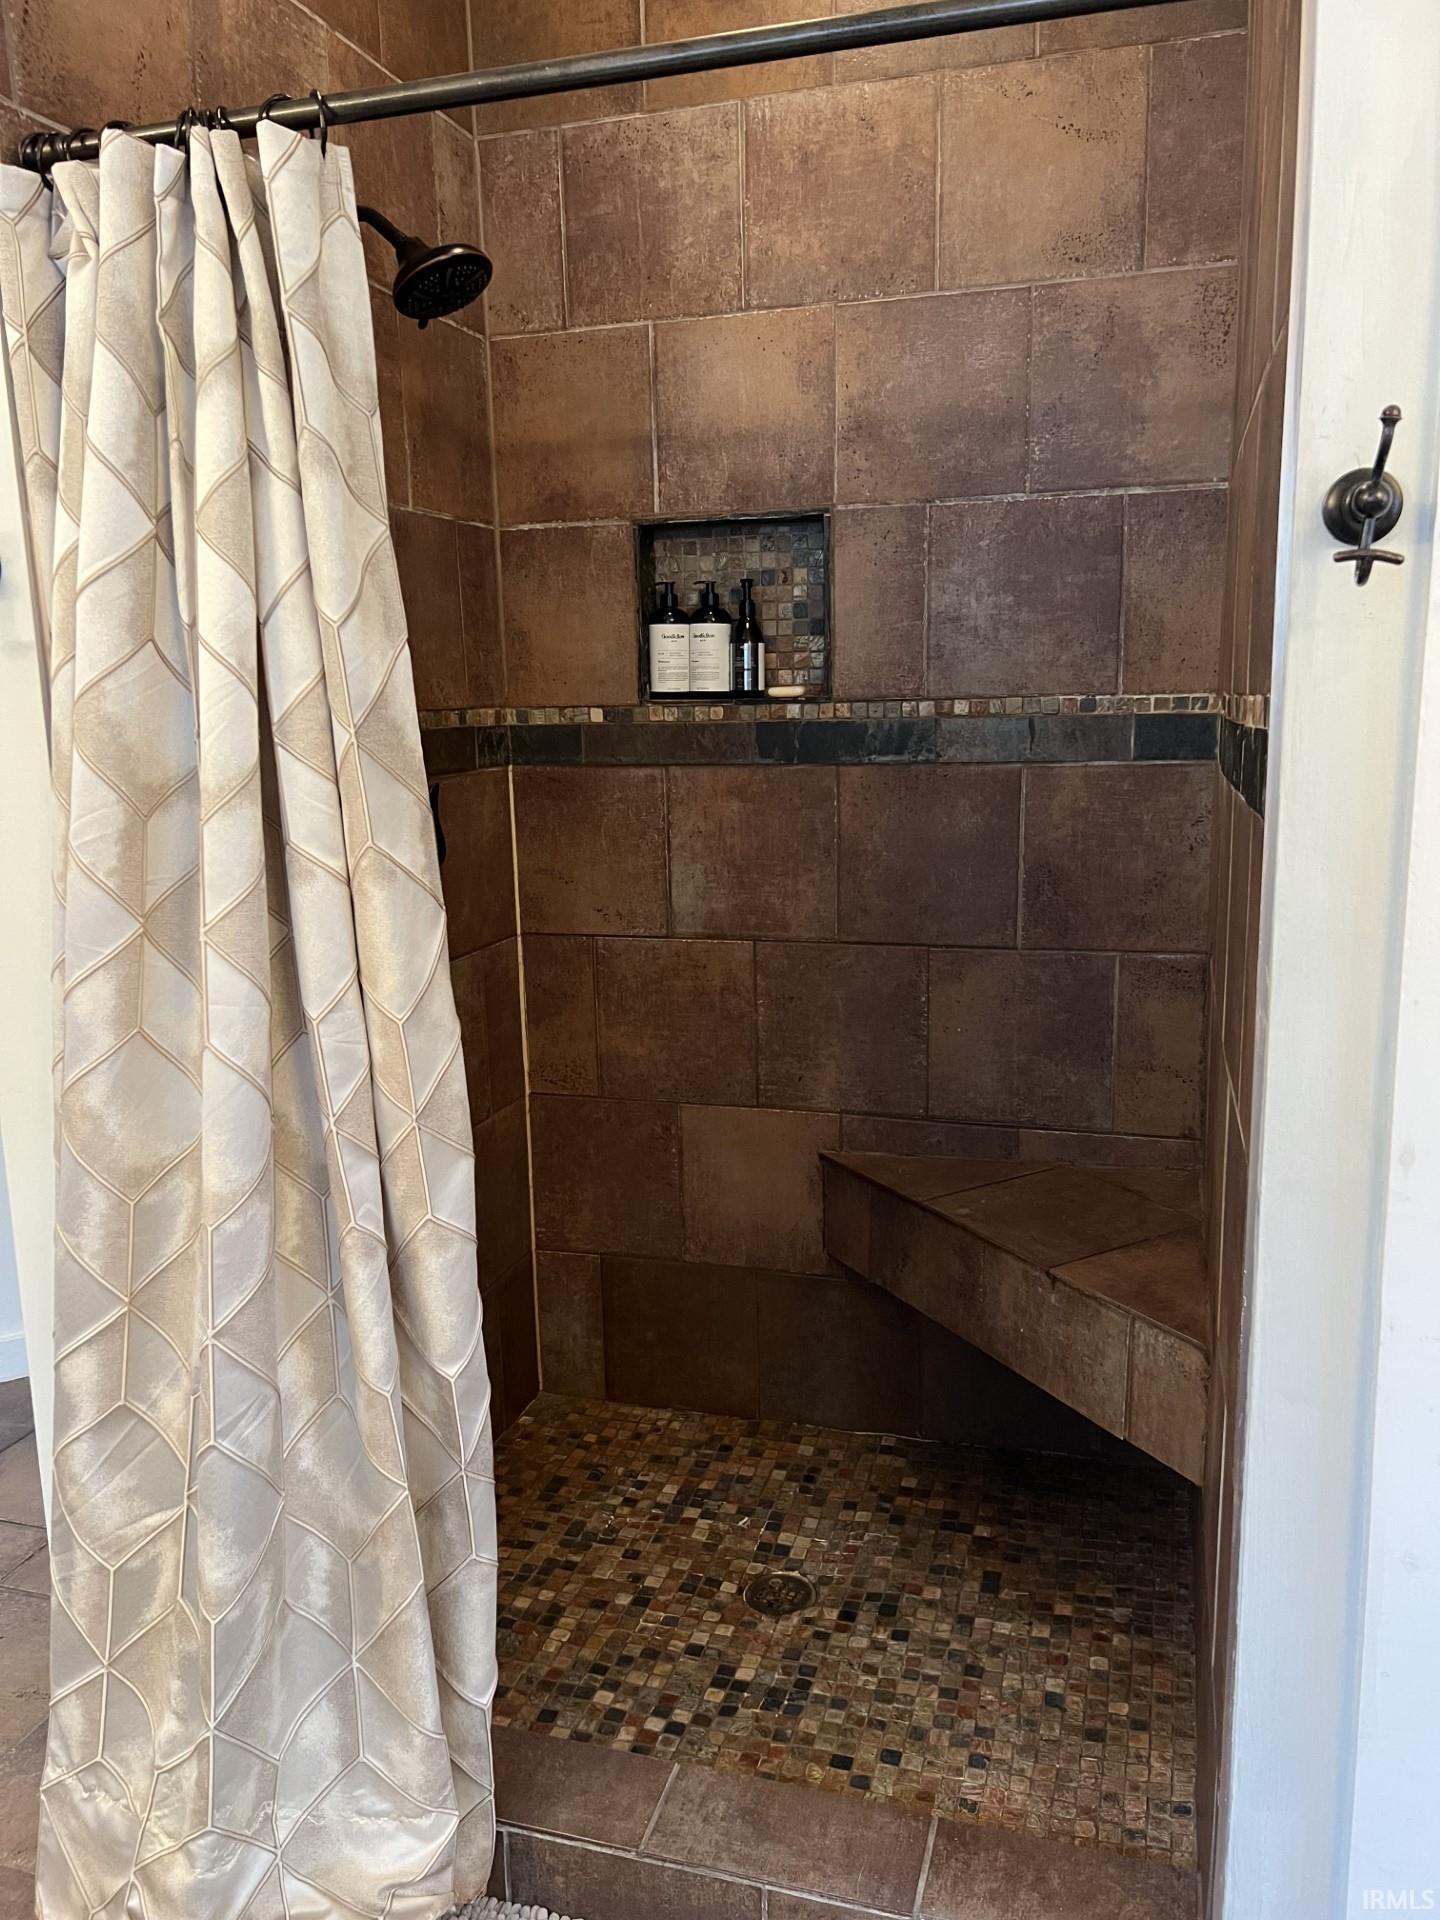 This shower is perfect for relaxing after a long work day.